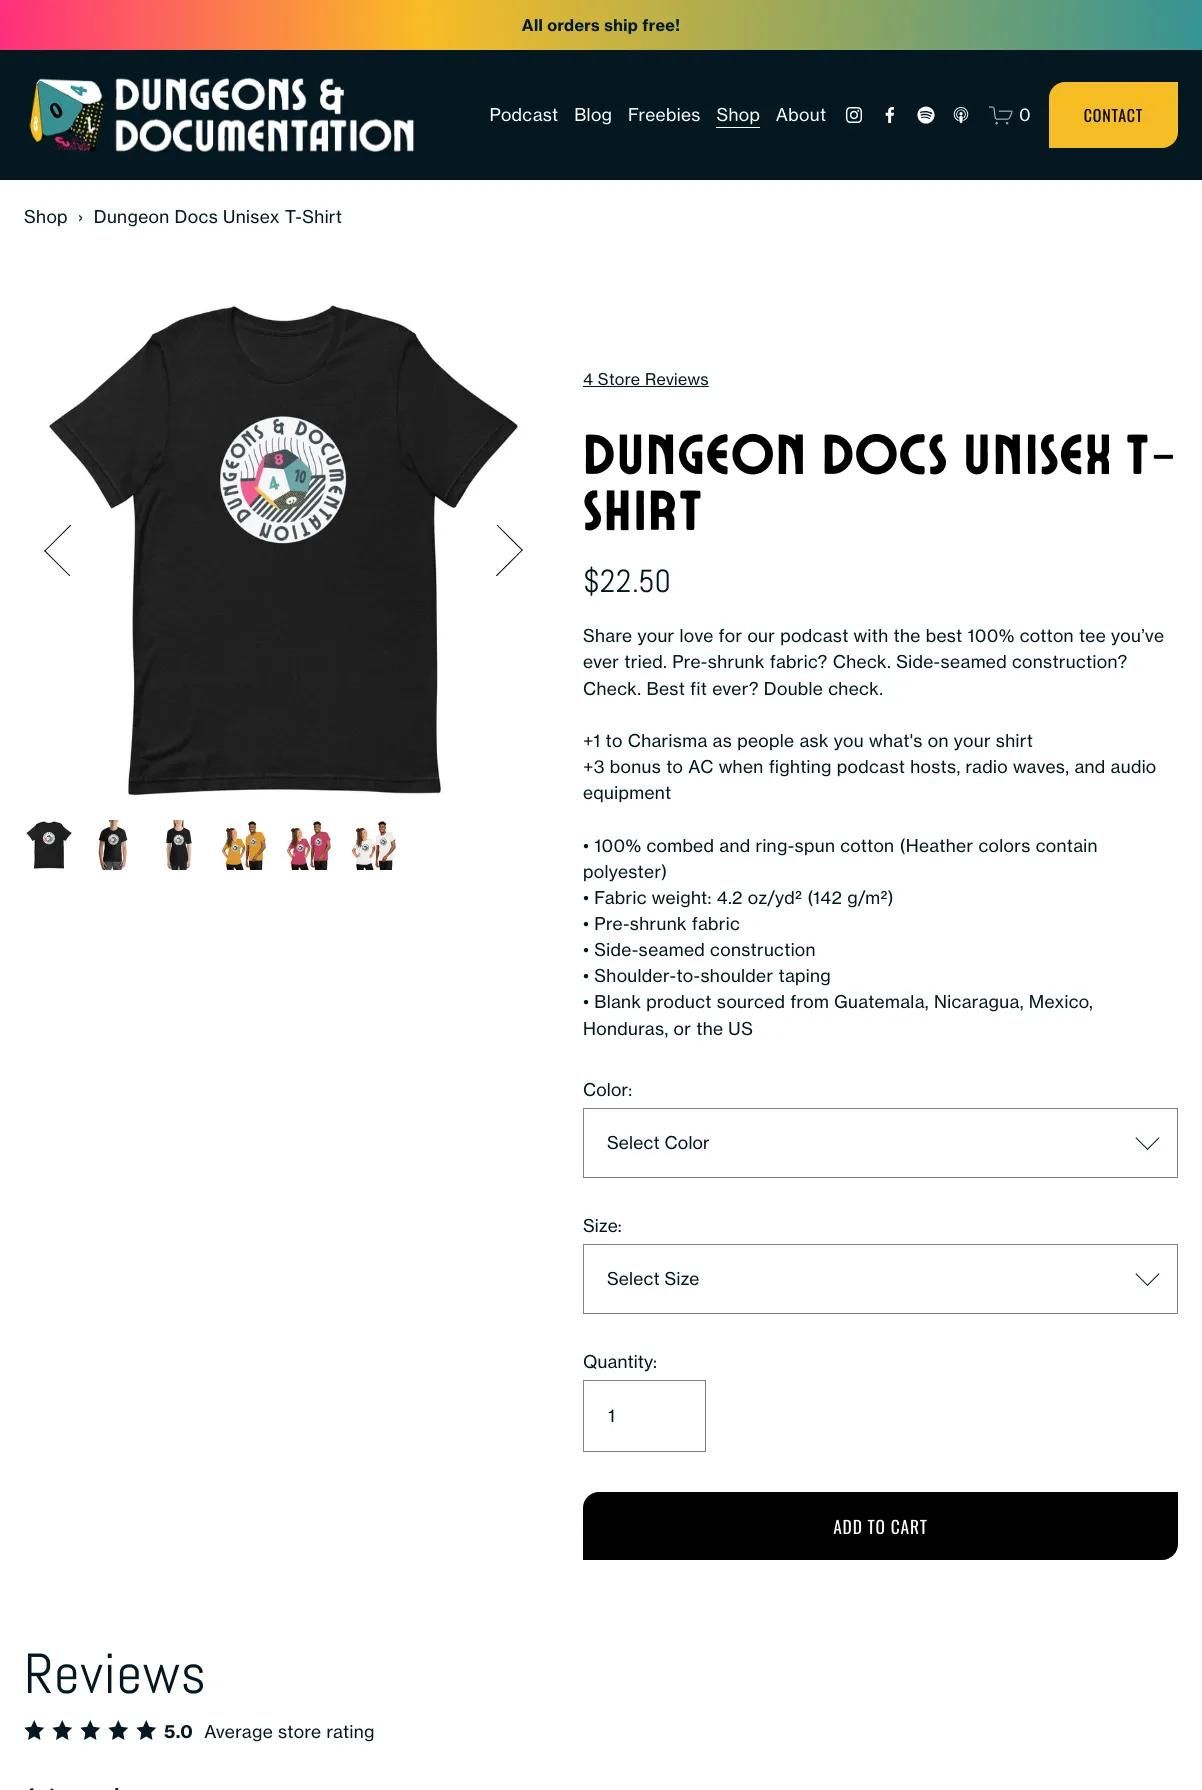 Screenshot 3 of Dungeons & Documentation (Example Squarespace Ecommerce Website)